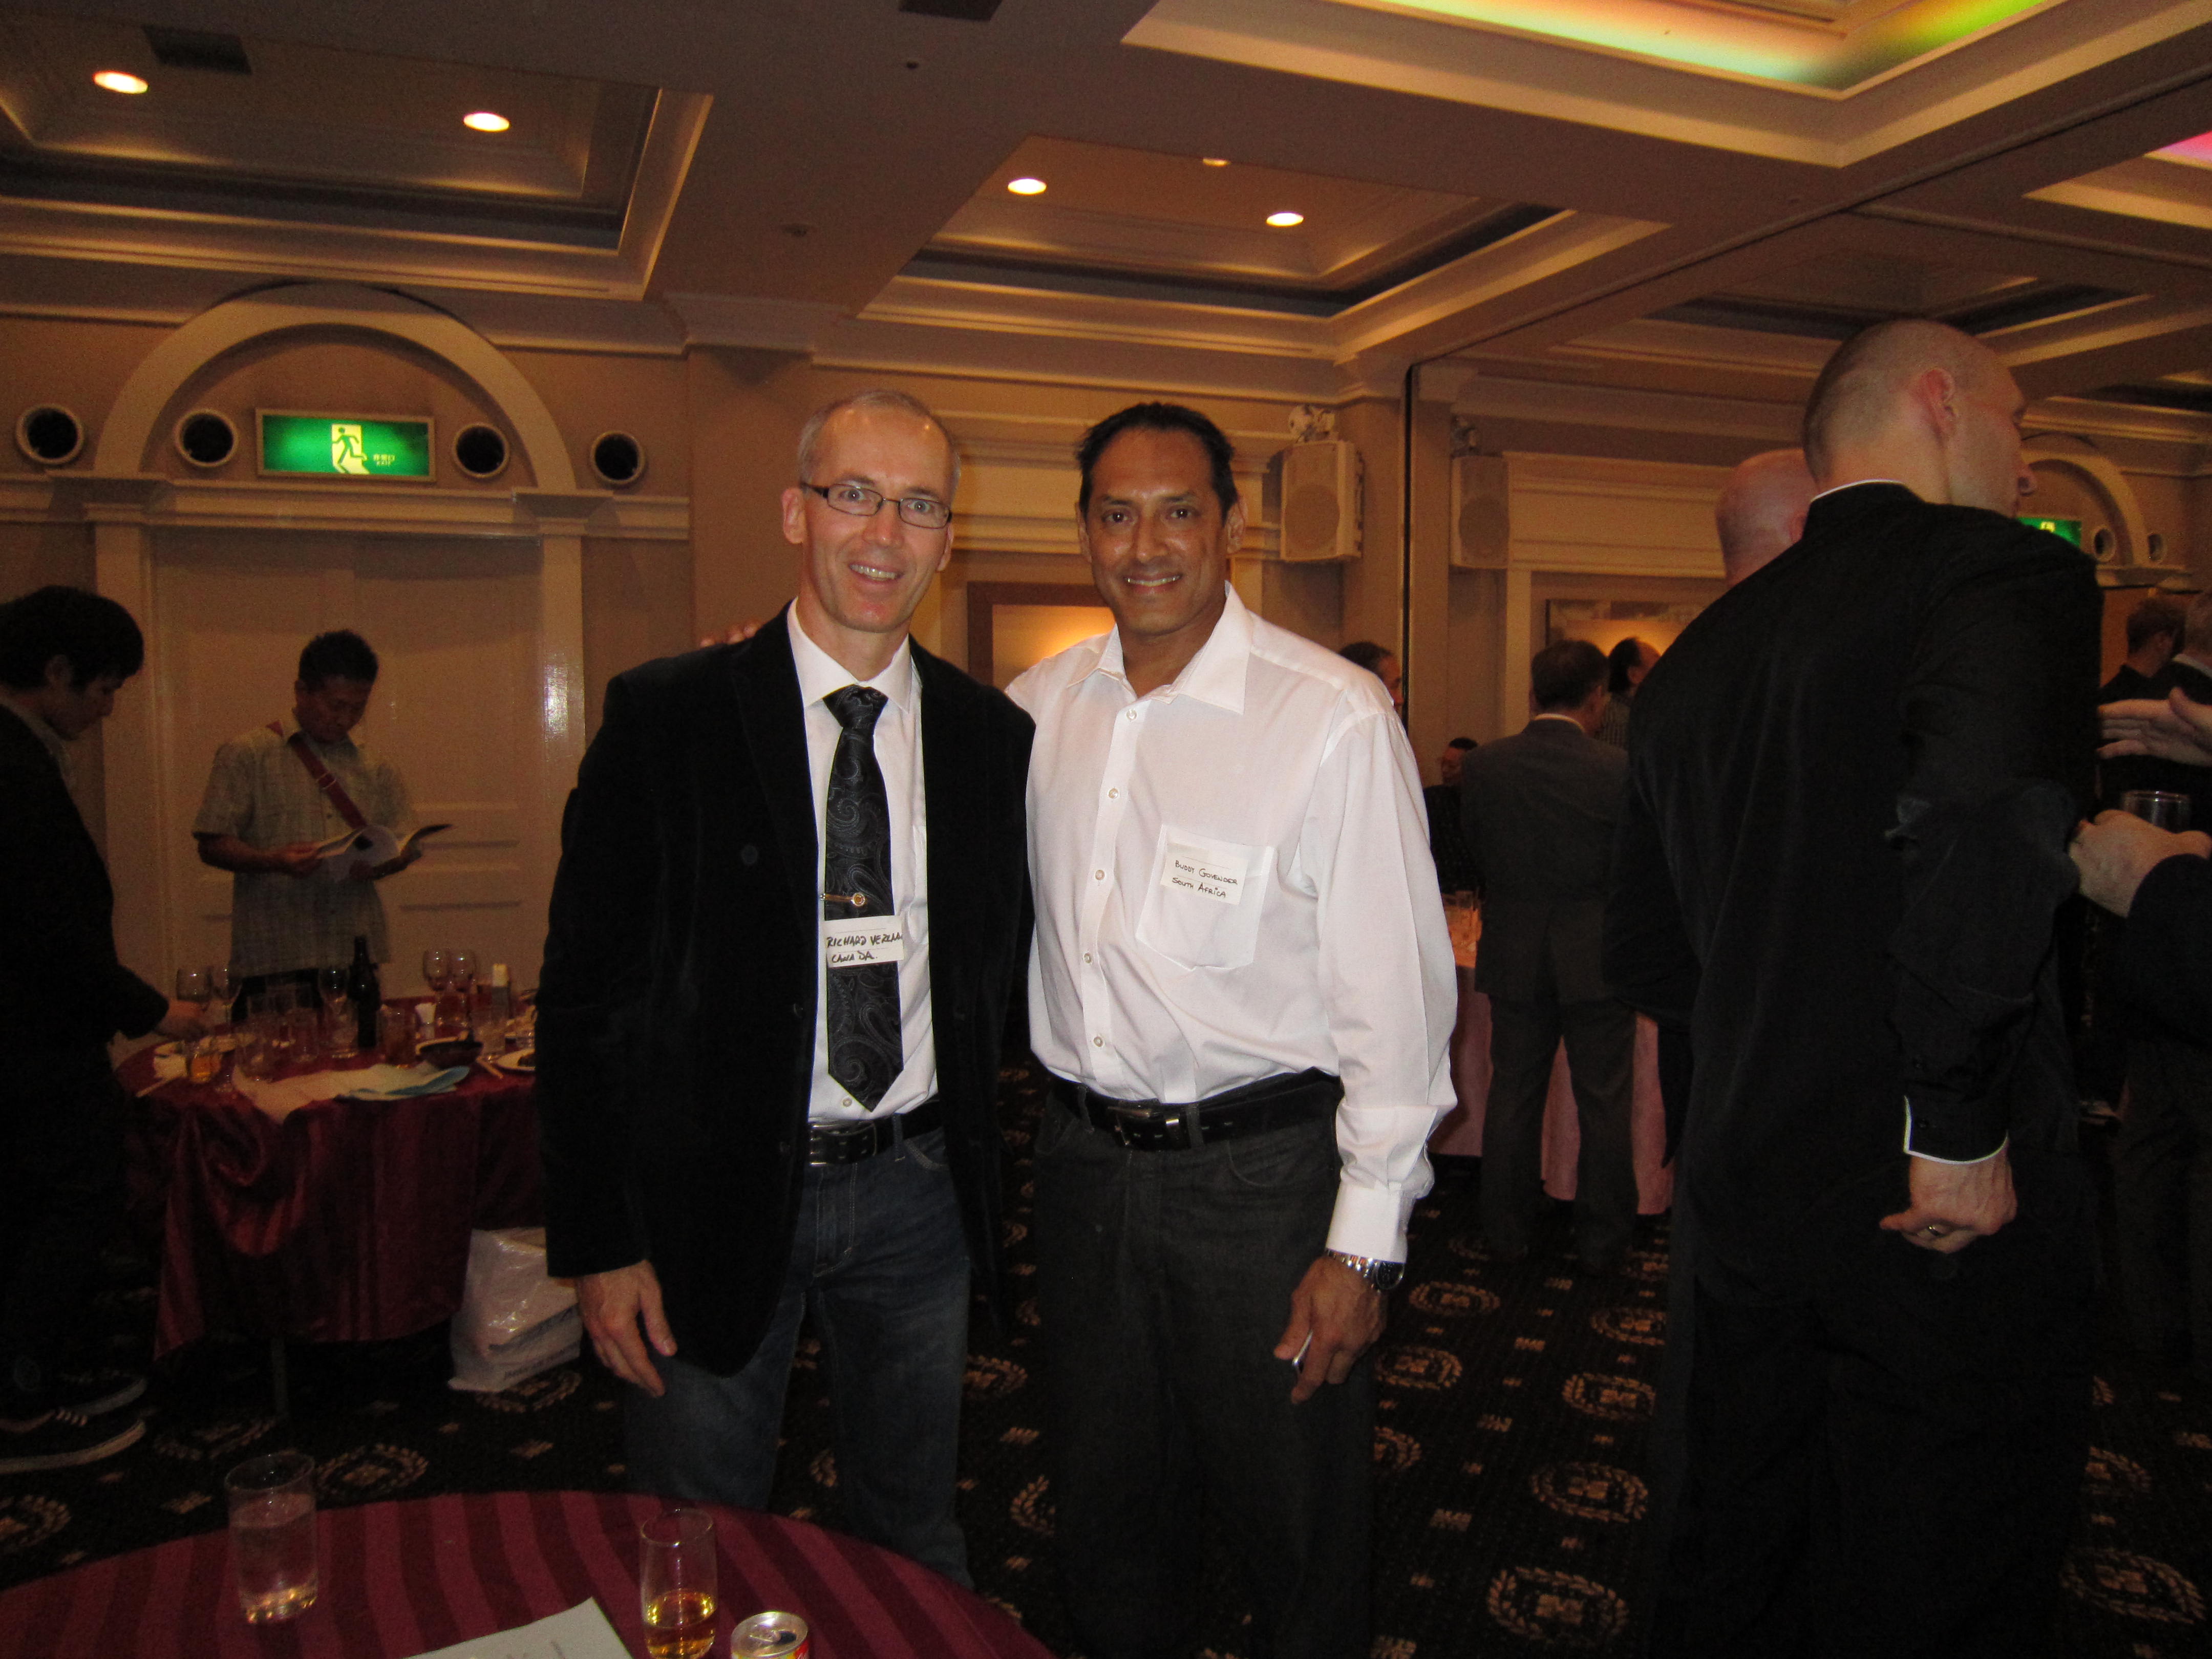 Richard Verlaan(l) with Buddy Govender president of South Africa OKGRJ